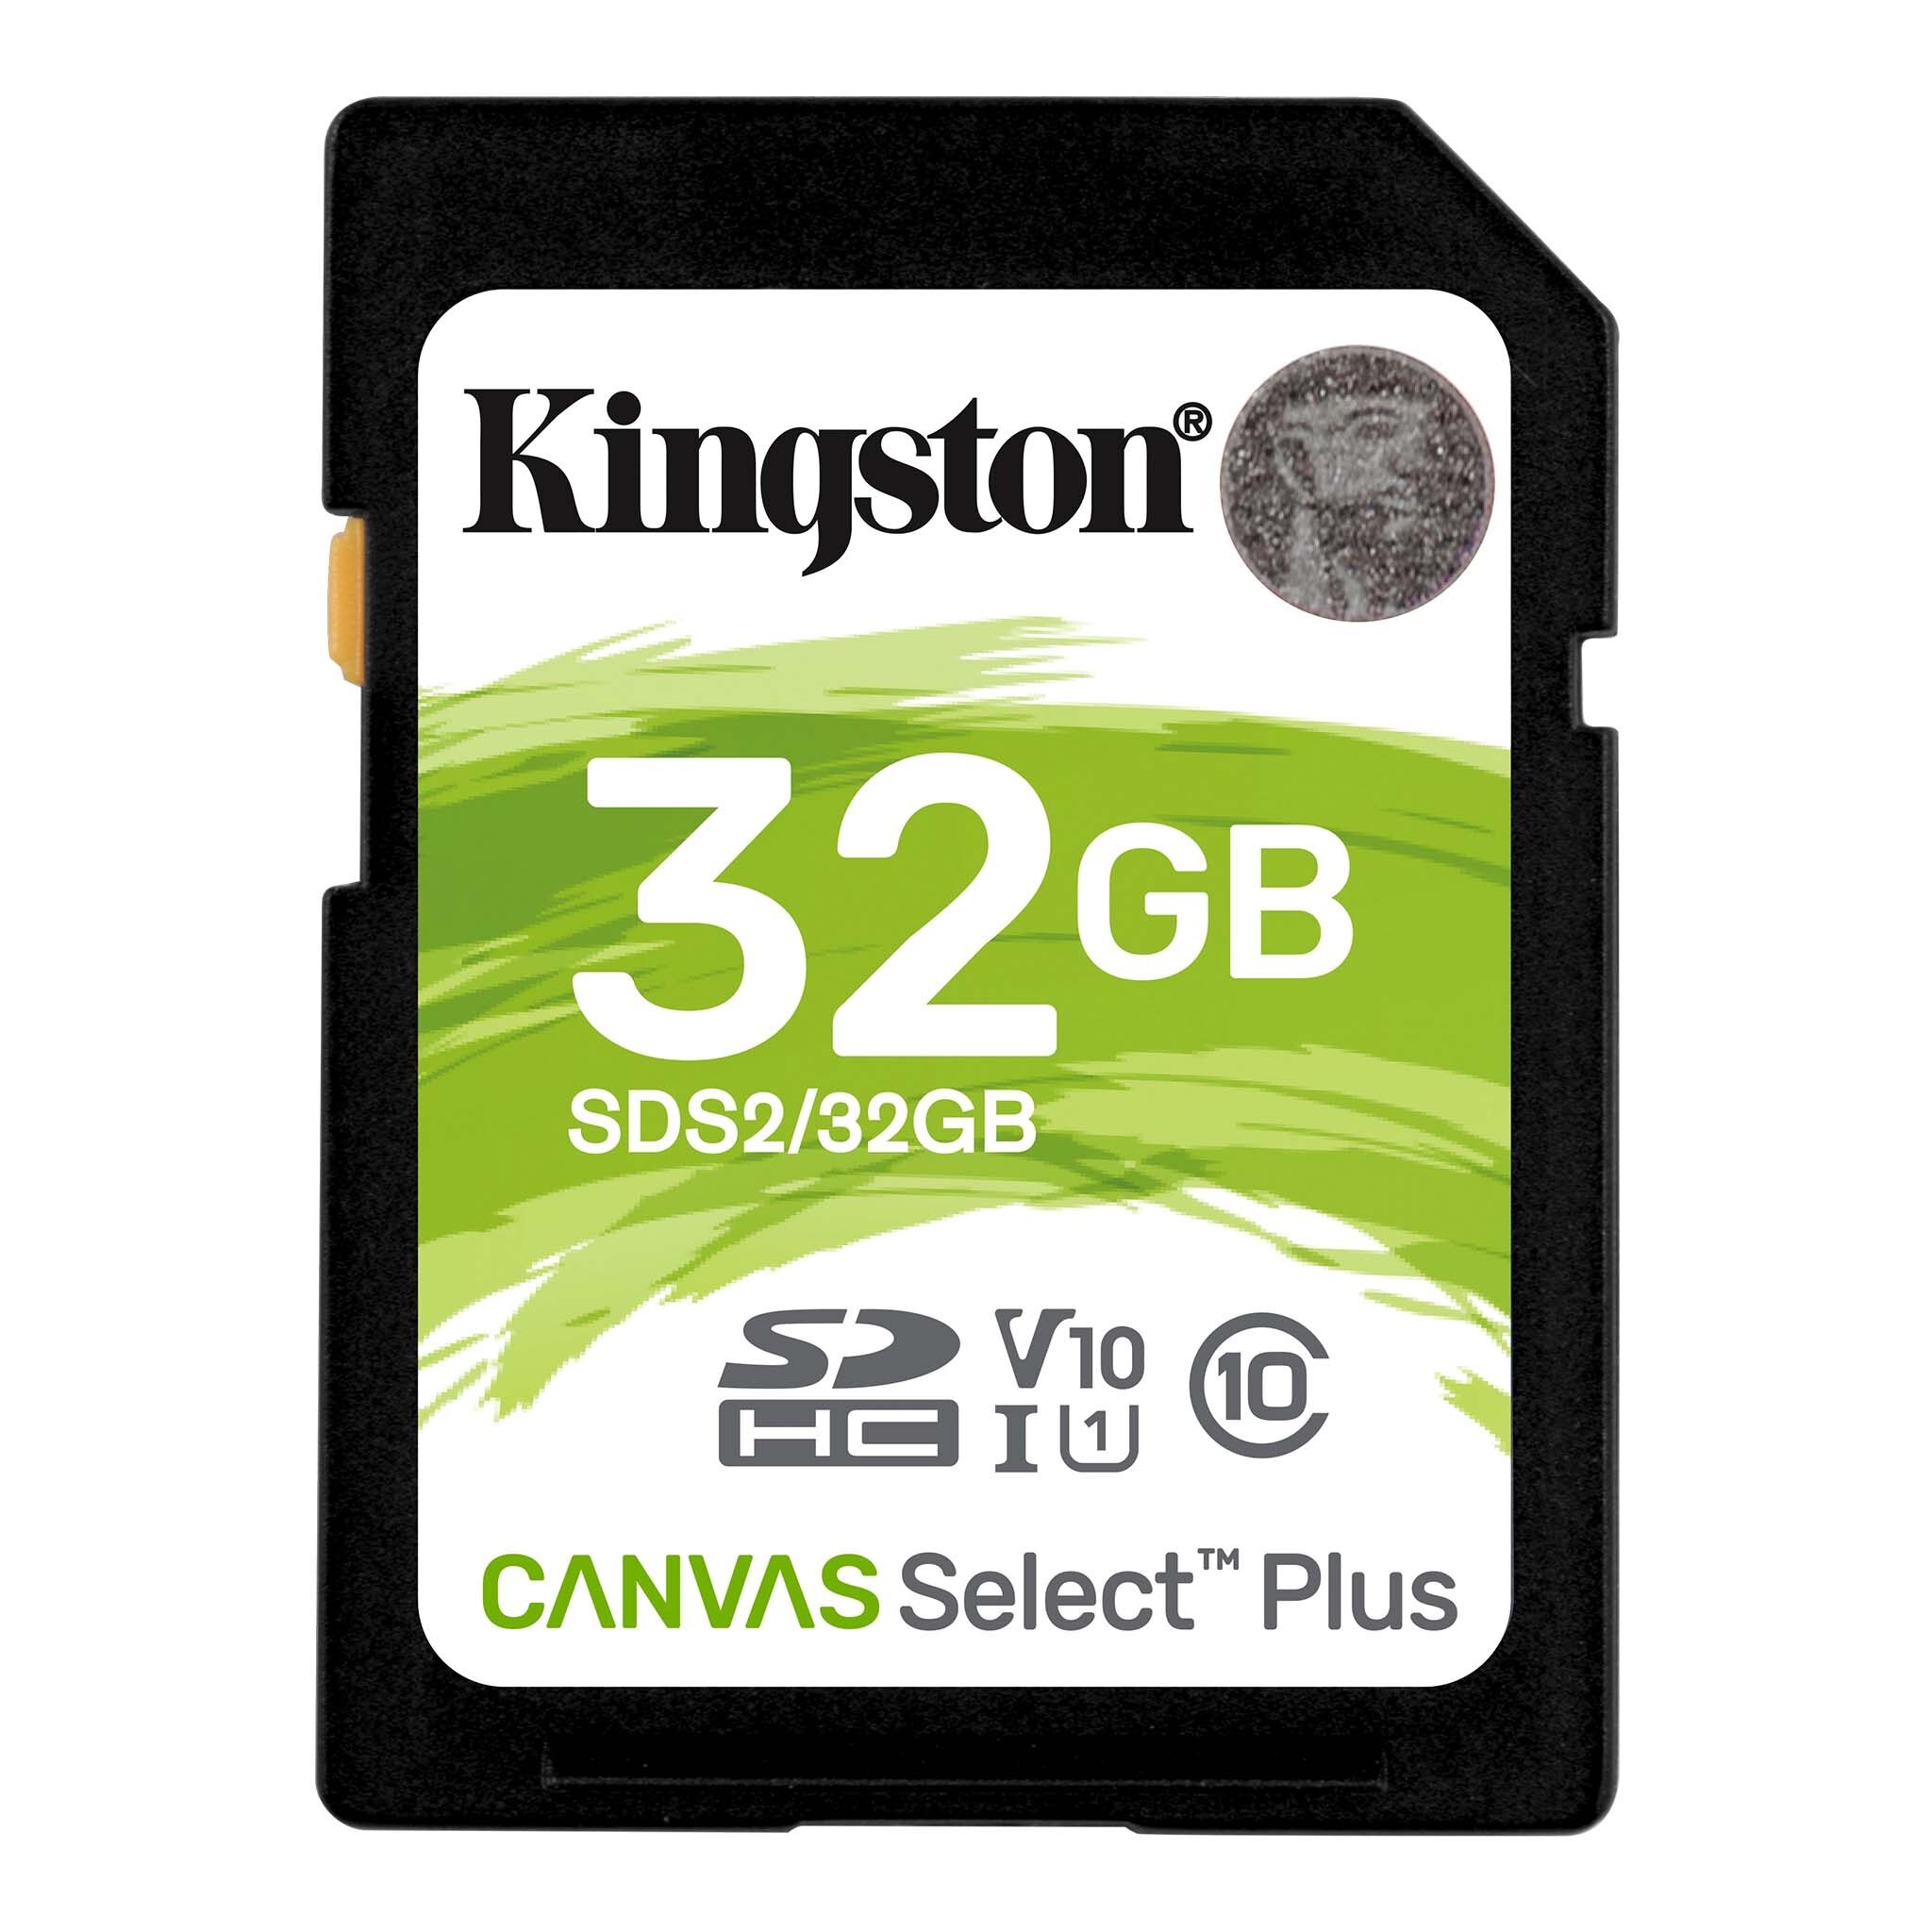 Kingston Canvas Select Plus SD Card SDS2 with Class 10, USH-1 Standard, Full HD Capture,  Plug and Play (32GB / 64GB / 128GB / 256GB)